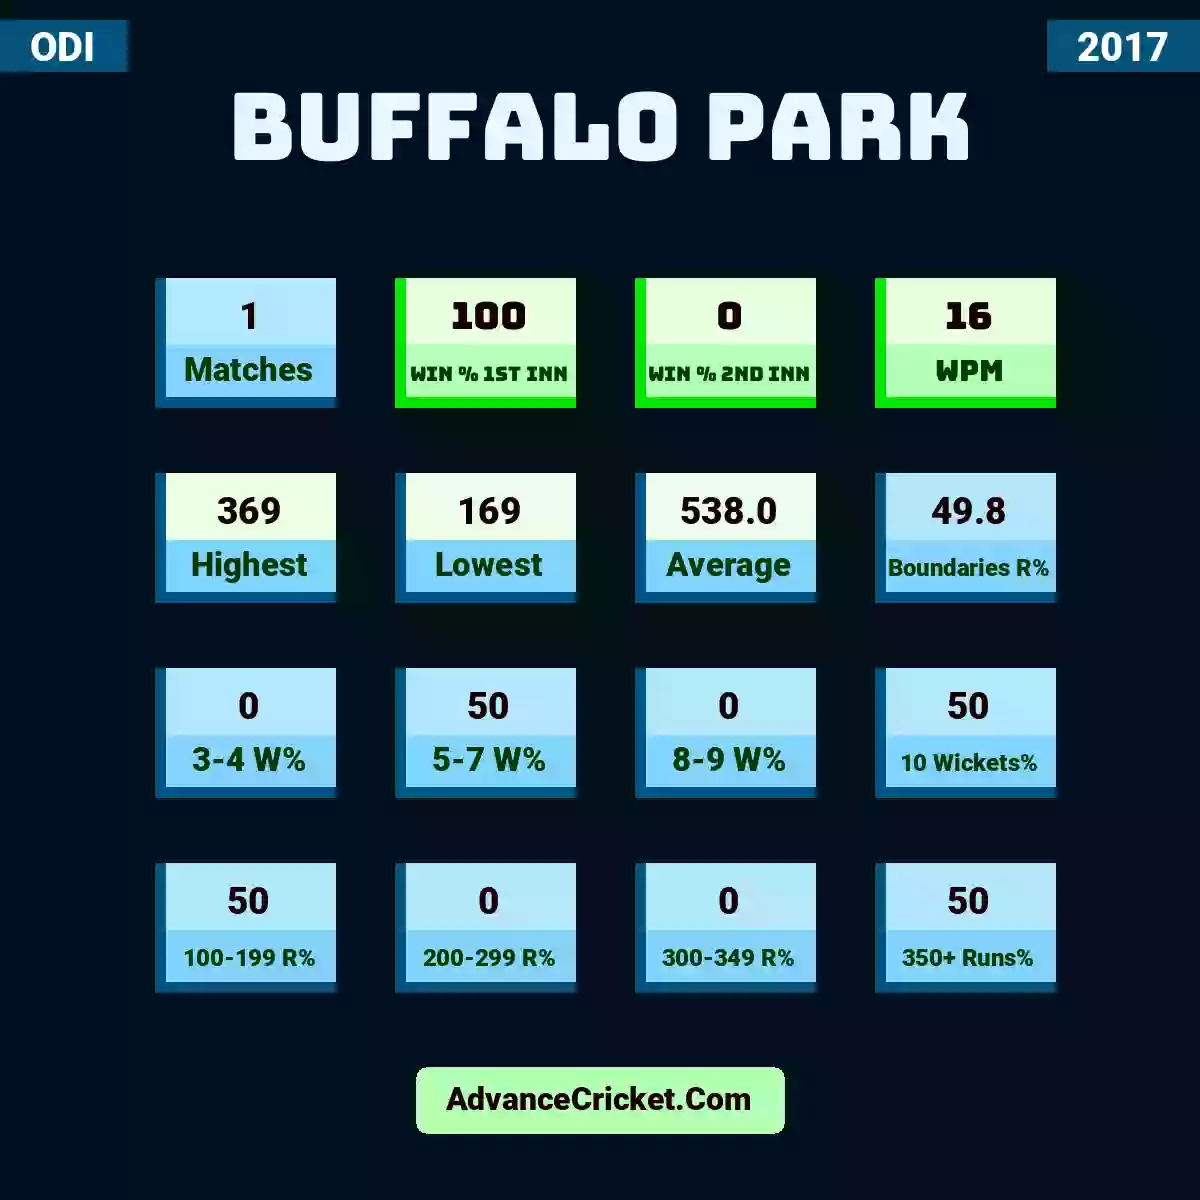 Image showing Buffalo Park with Matches: 1, Win % 1st Inn: 100, Win % 2nd Inn: 0, WPM: 16, Highest: 369, Lowest: 169, Average: 538.0, Boundaries R%: 49.8, 3-4 W%: 0, 5-7 W%: 50, 8-9 W%: 0, 10 Wickets%: 50, 100-199 R%: 50, 200-299 R%: 0, 300-349 R%: 0, 350+ Runs%: 50.